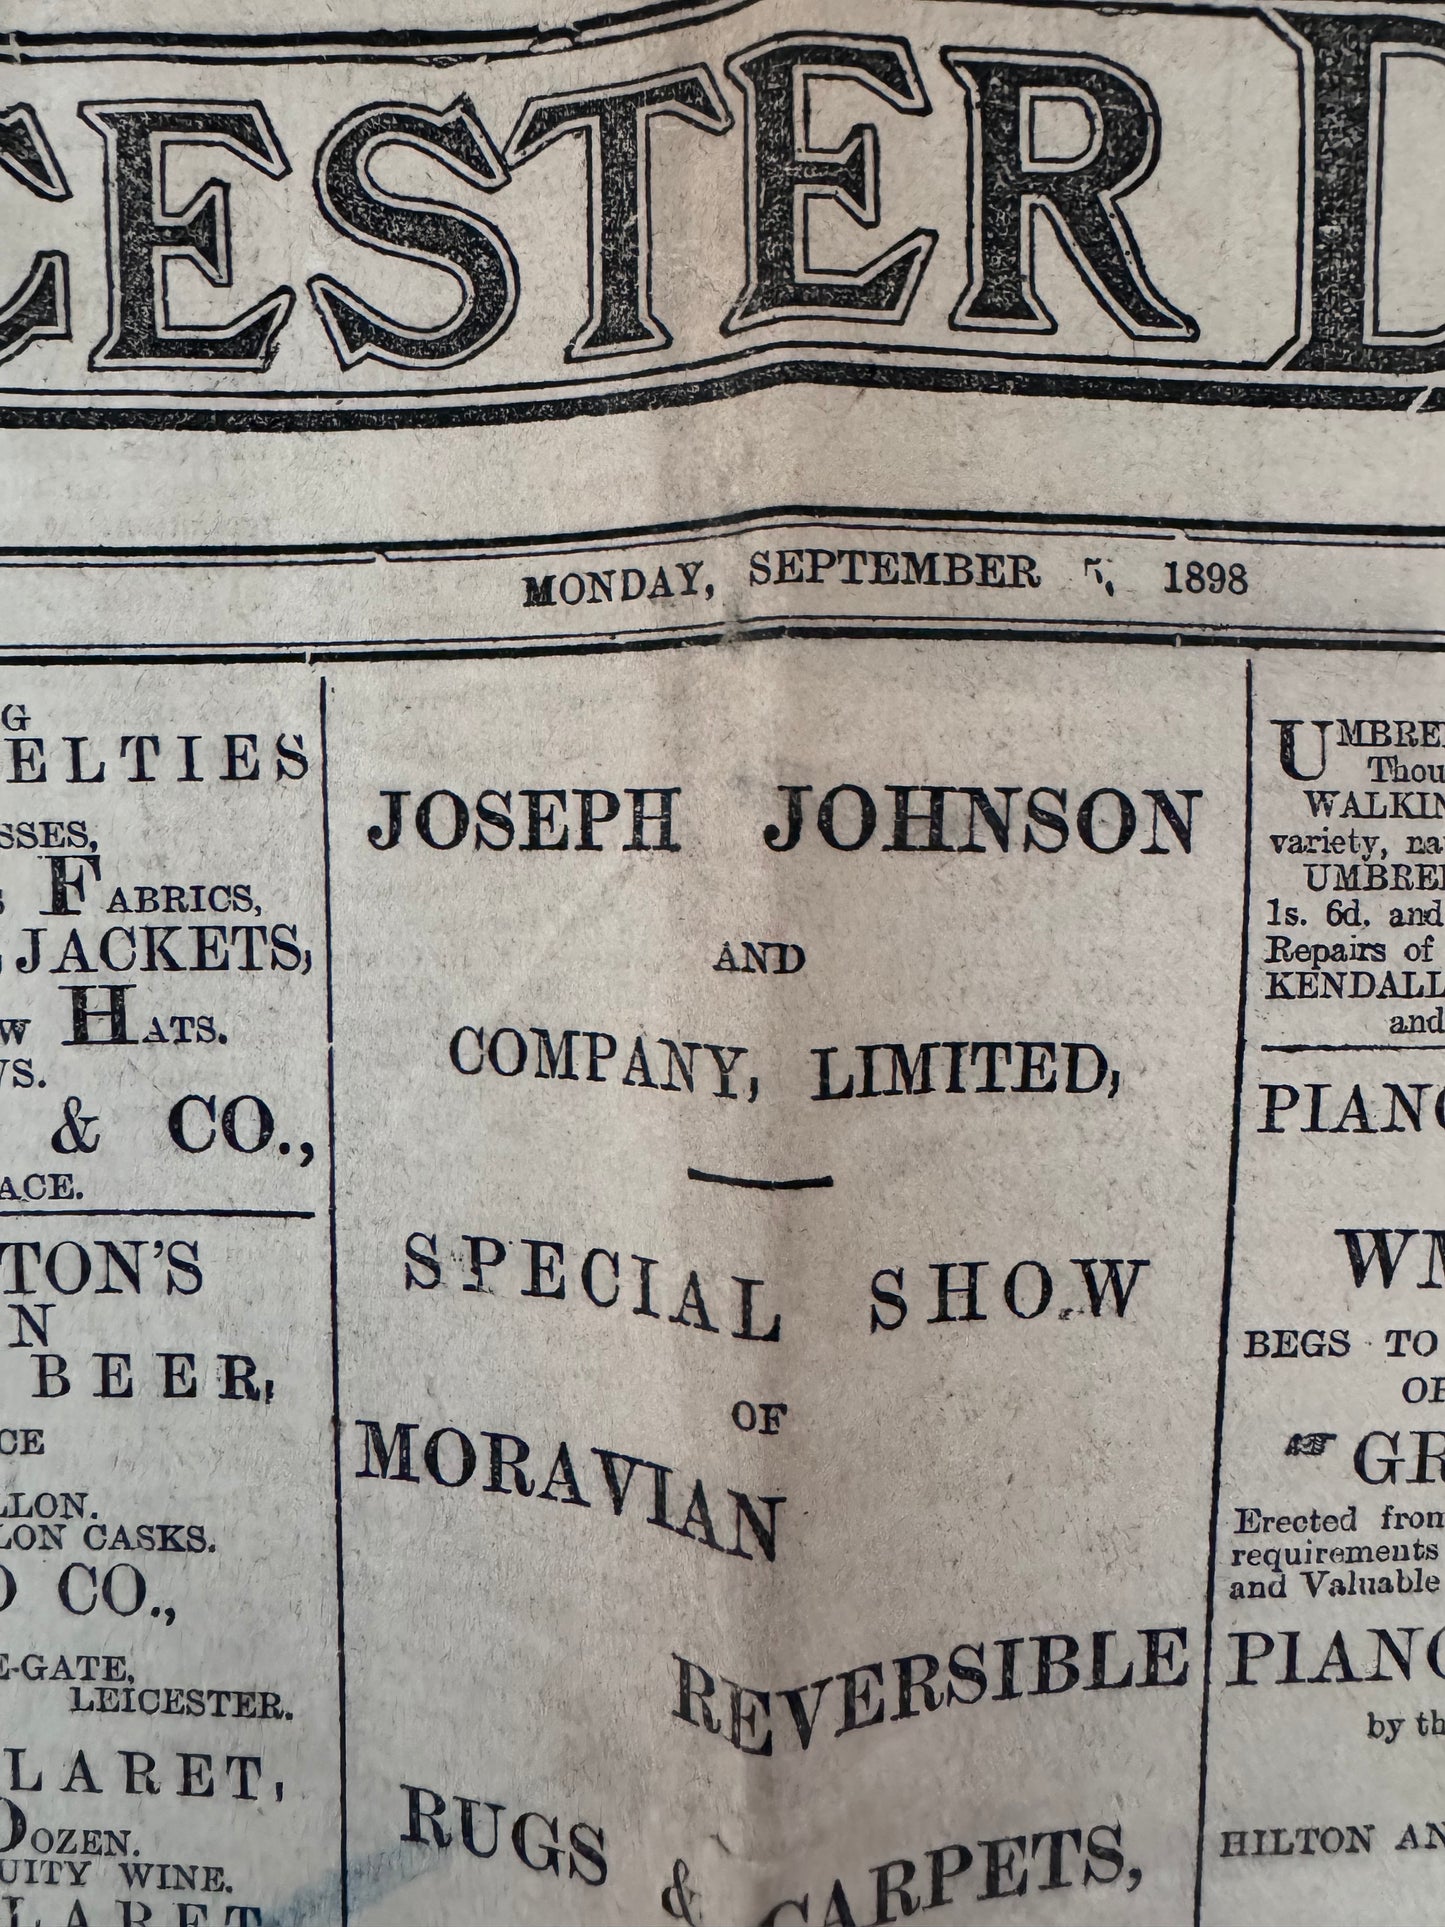 The Leicester Daily Post Sept. 5th, 1898